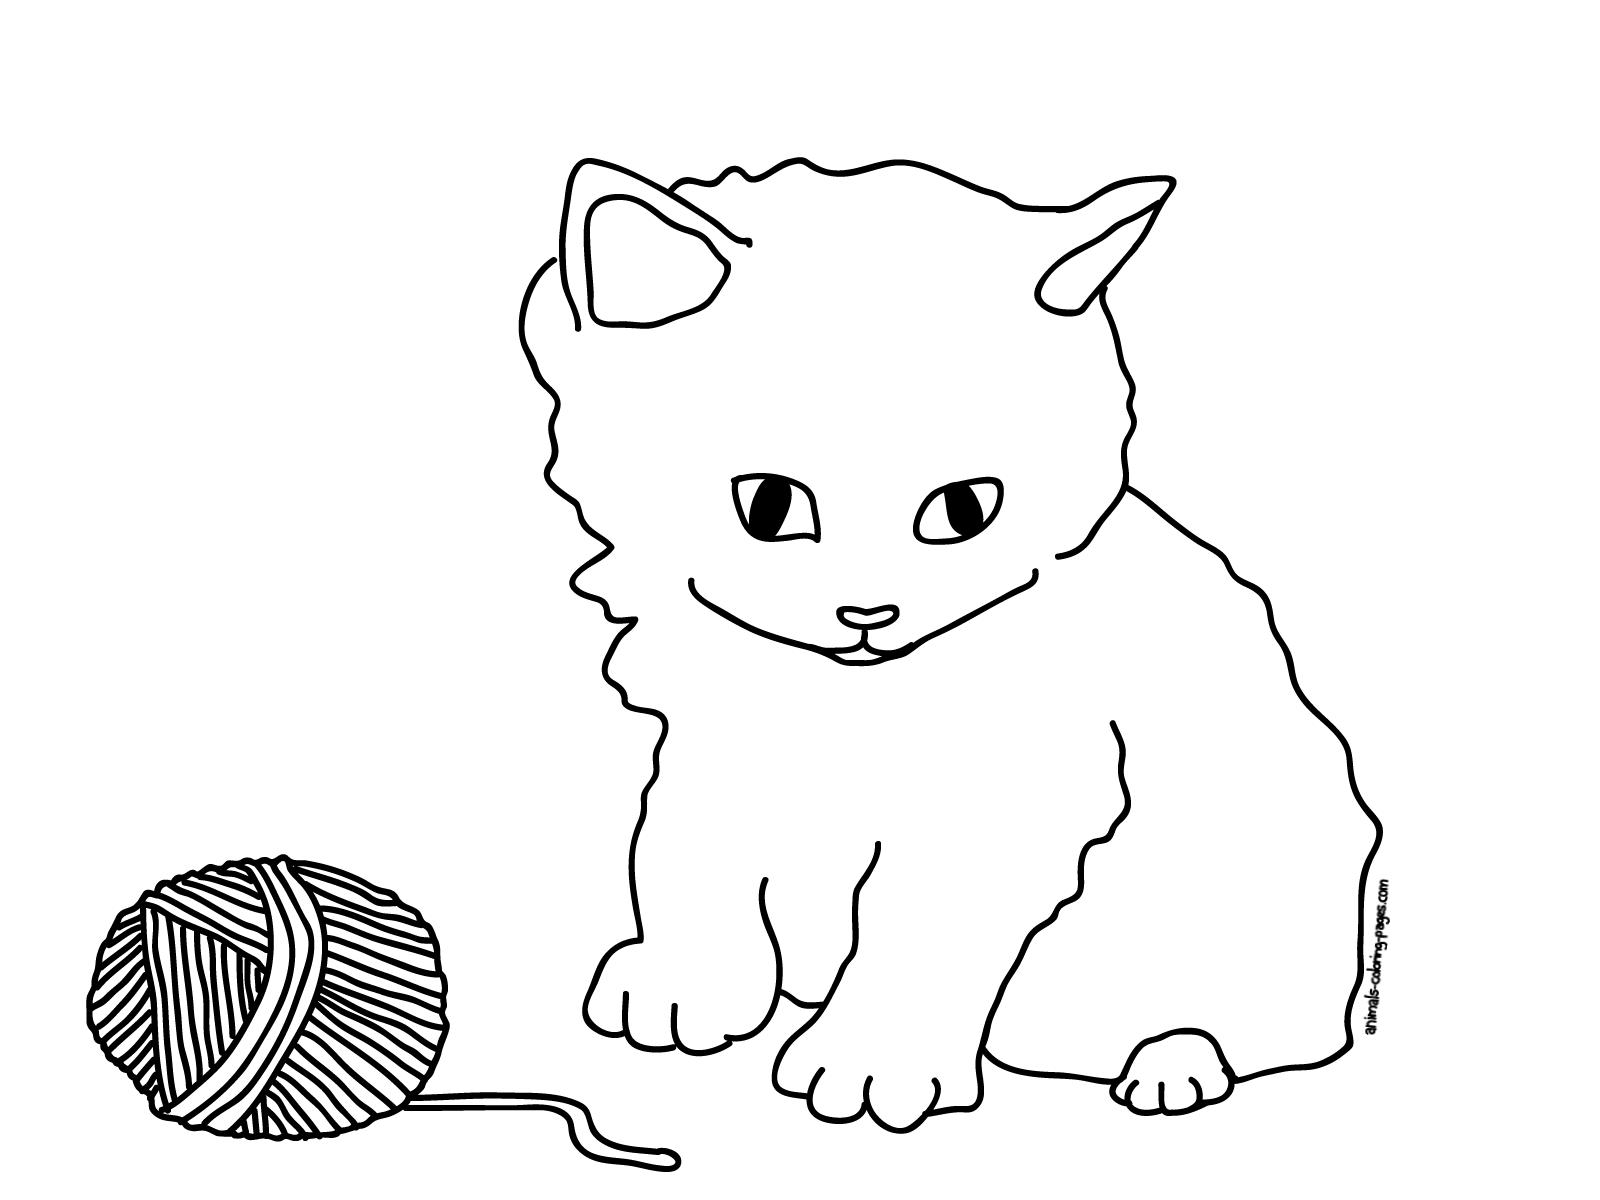 Download Coloring Pages: Cats and Kittens Coloring Pages Free and ...